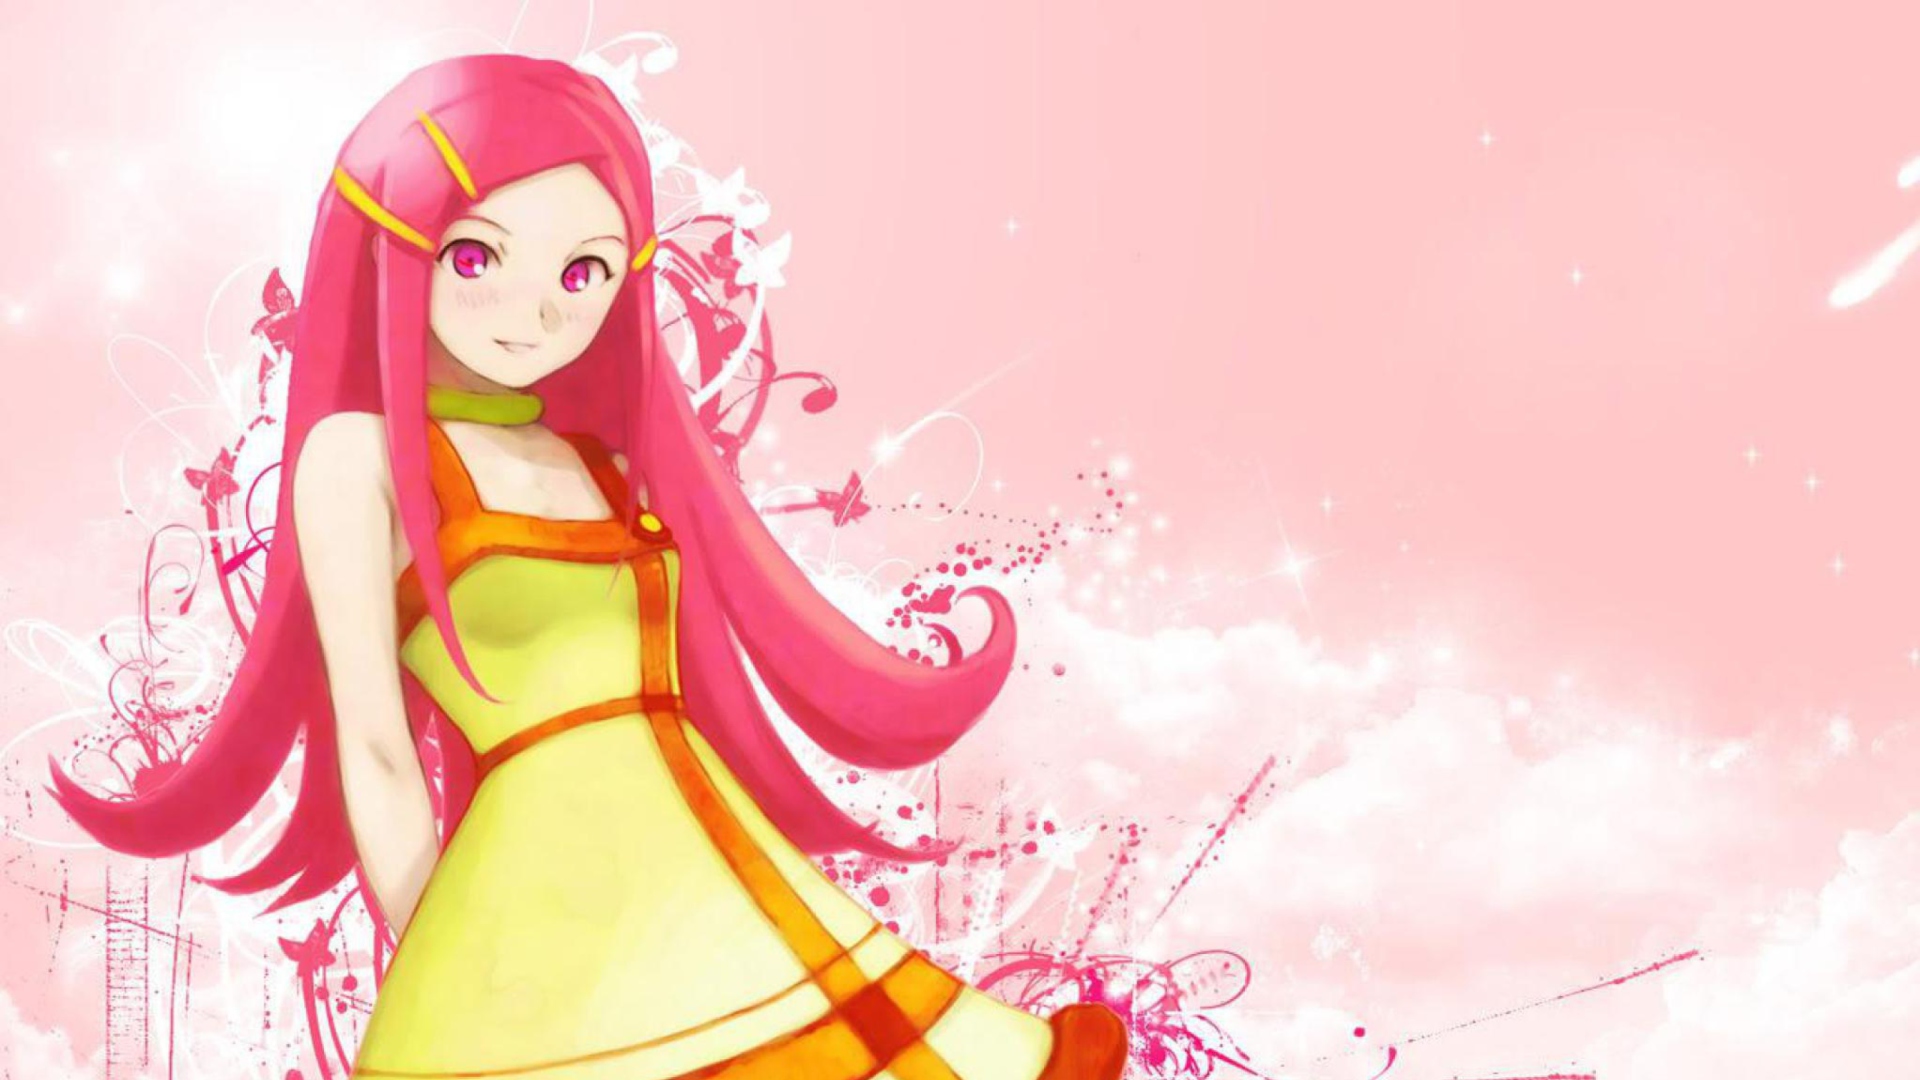 Girl With Pink Hair wallpaper 1920x1080